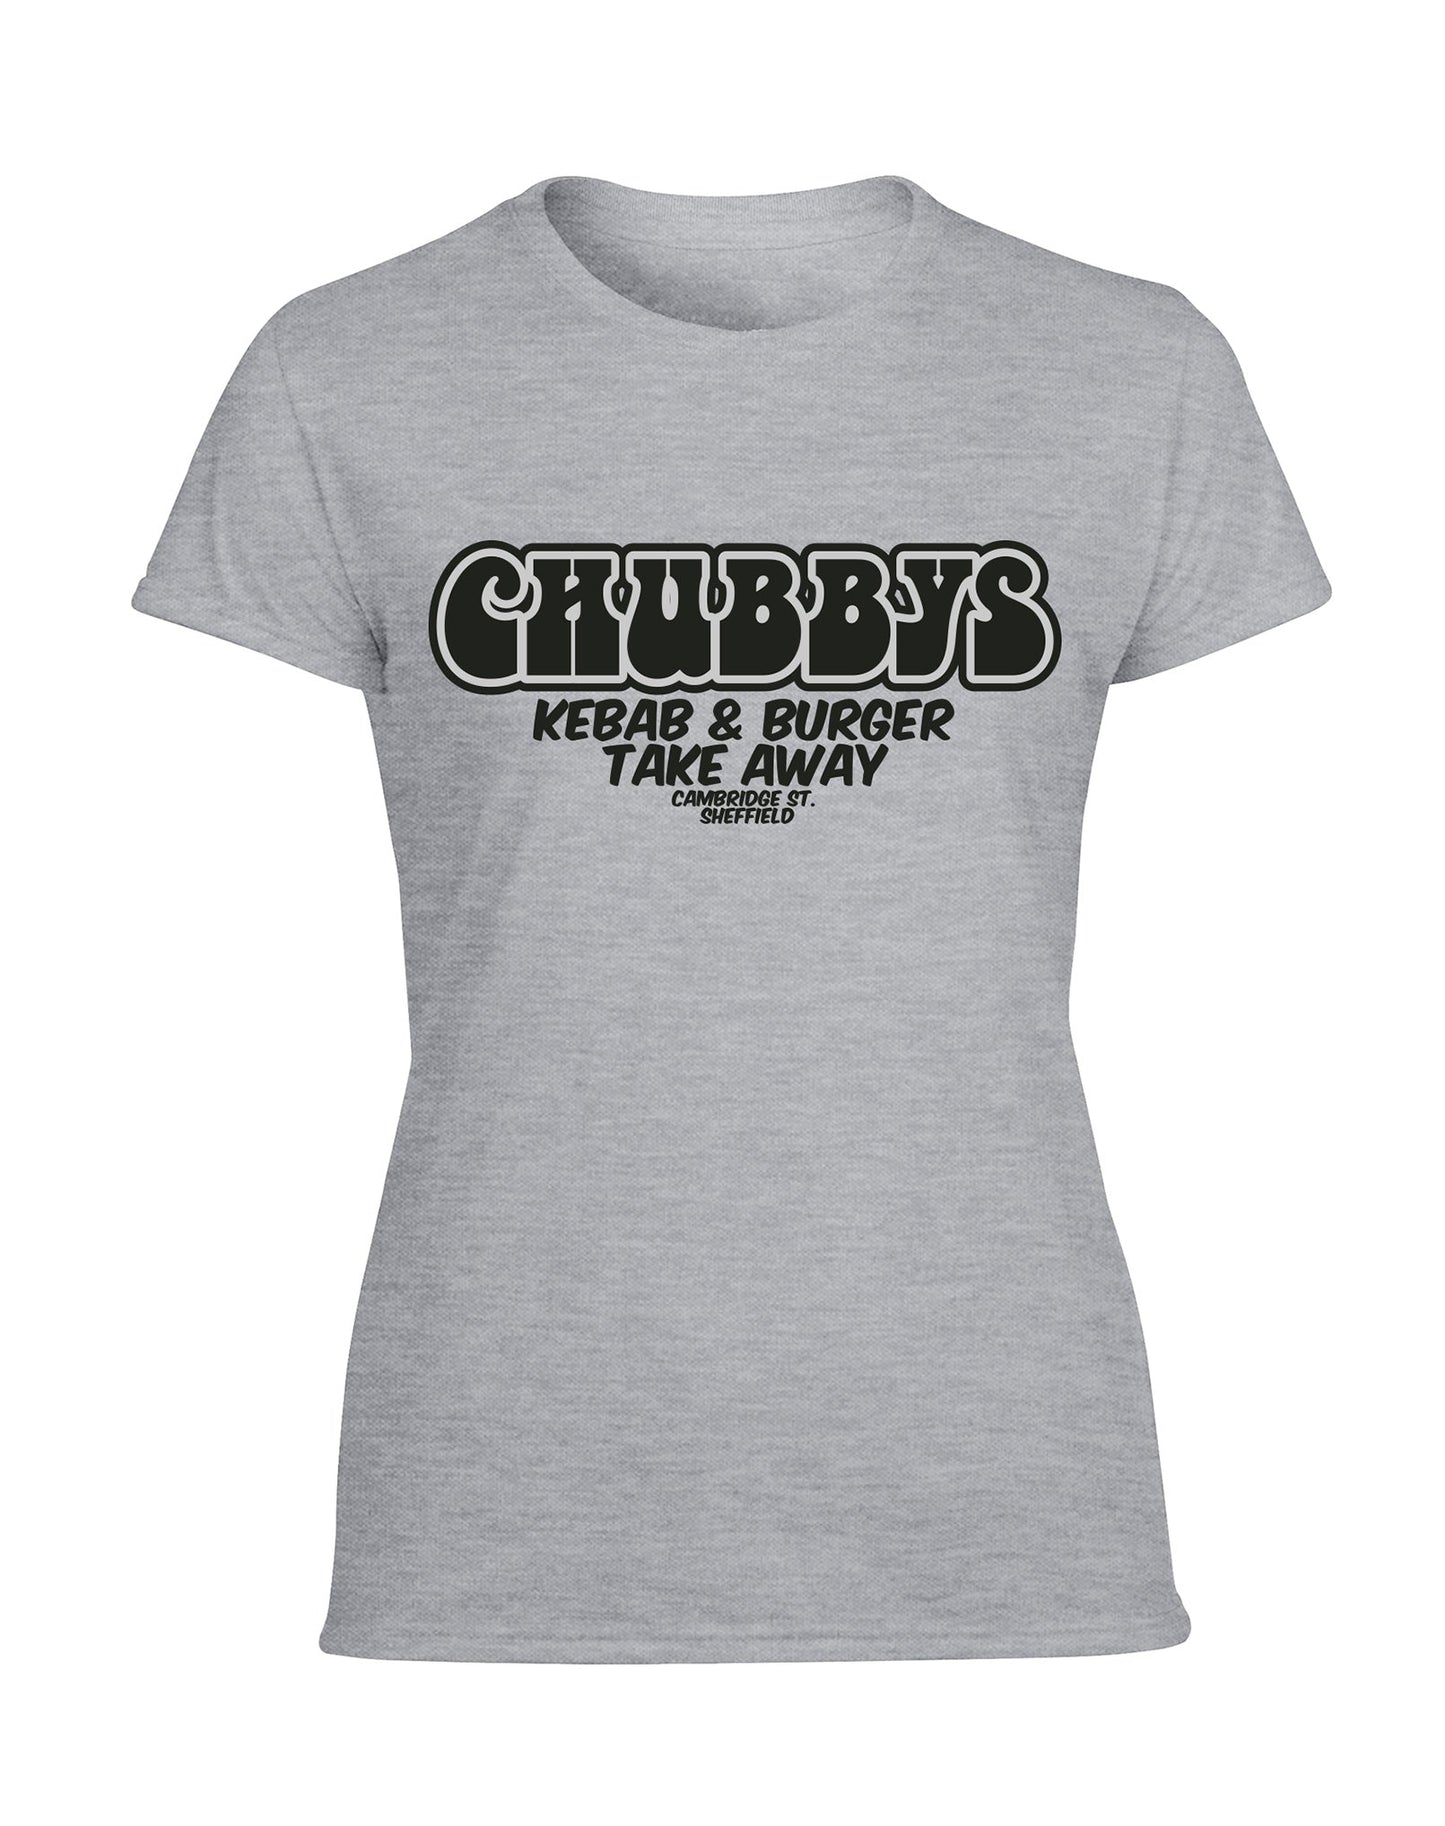 Chubbys ladies fit T-shirt - various colours - Dirty Stop Outs